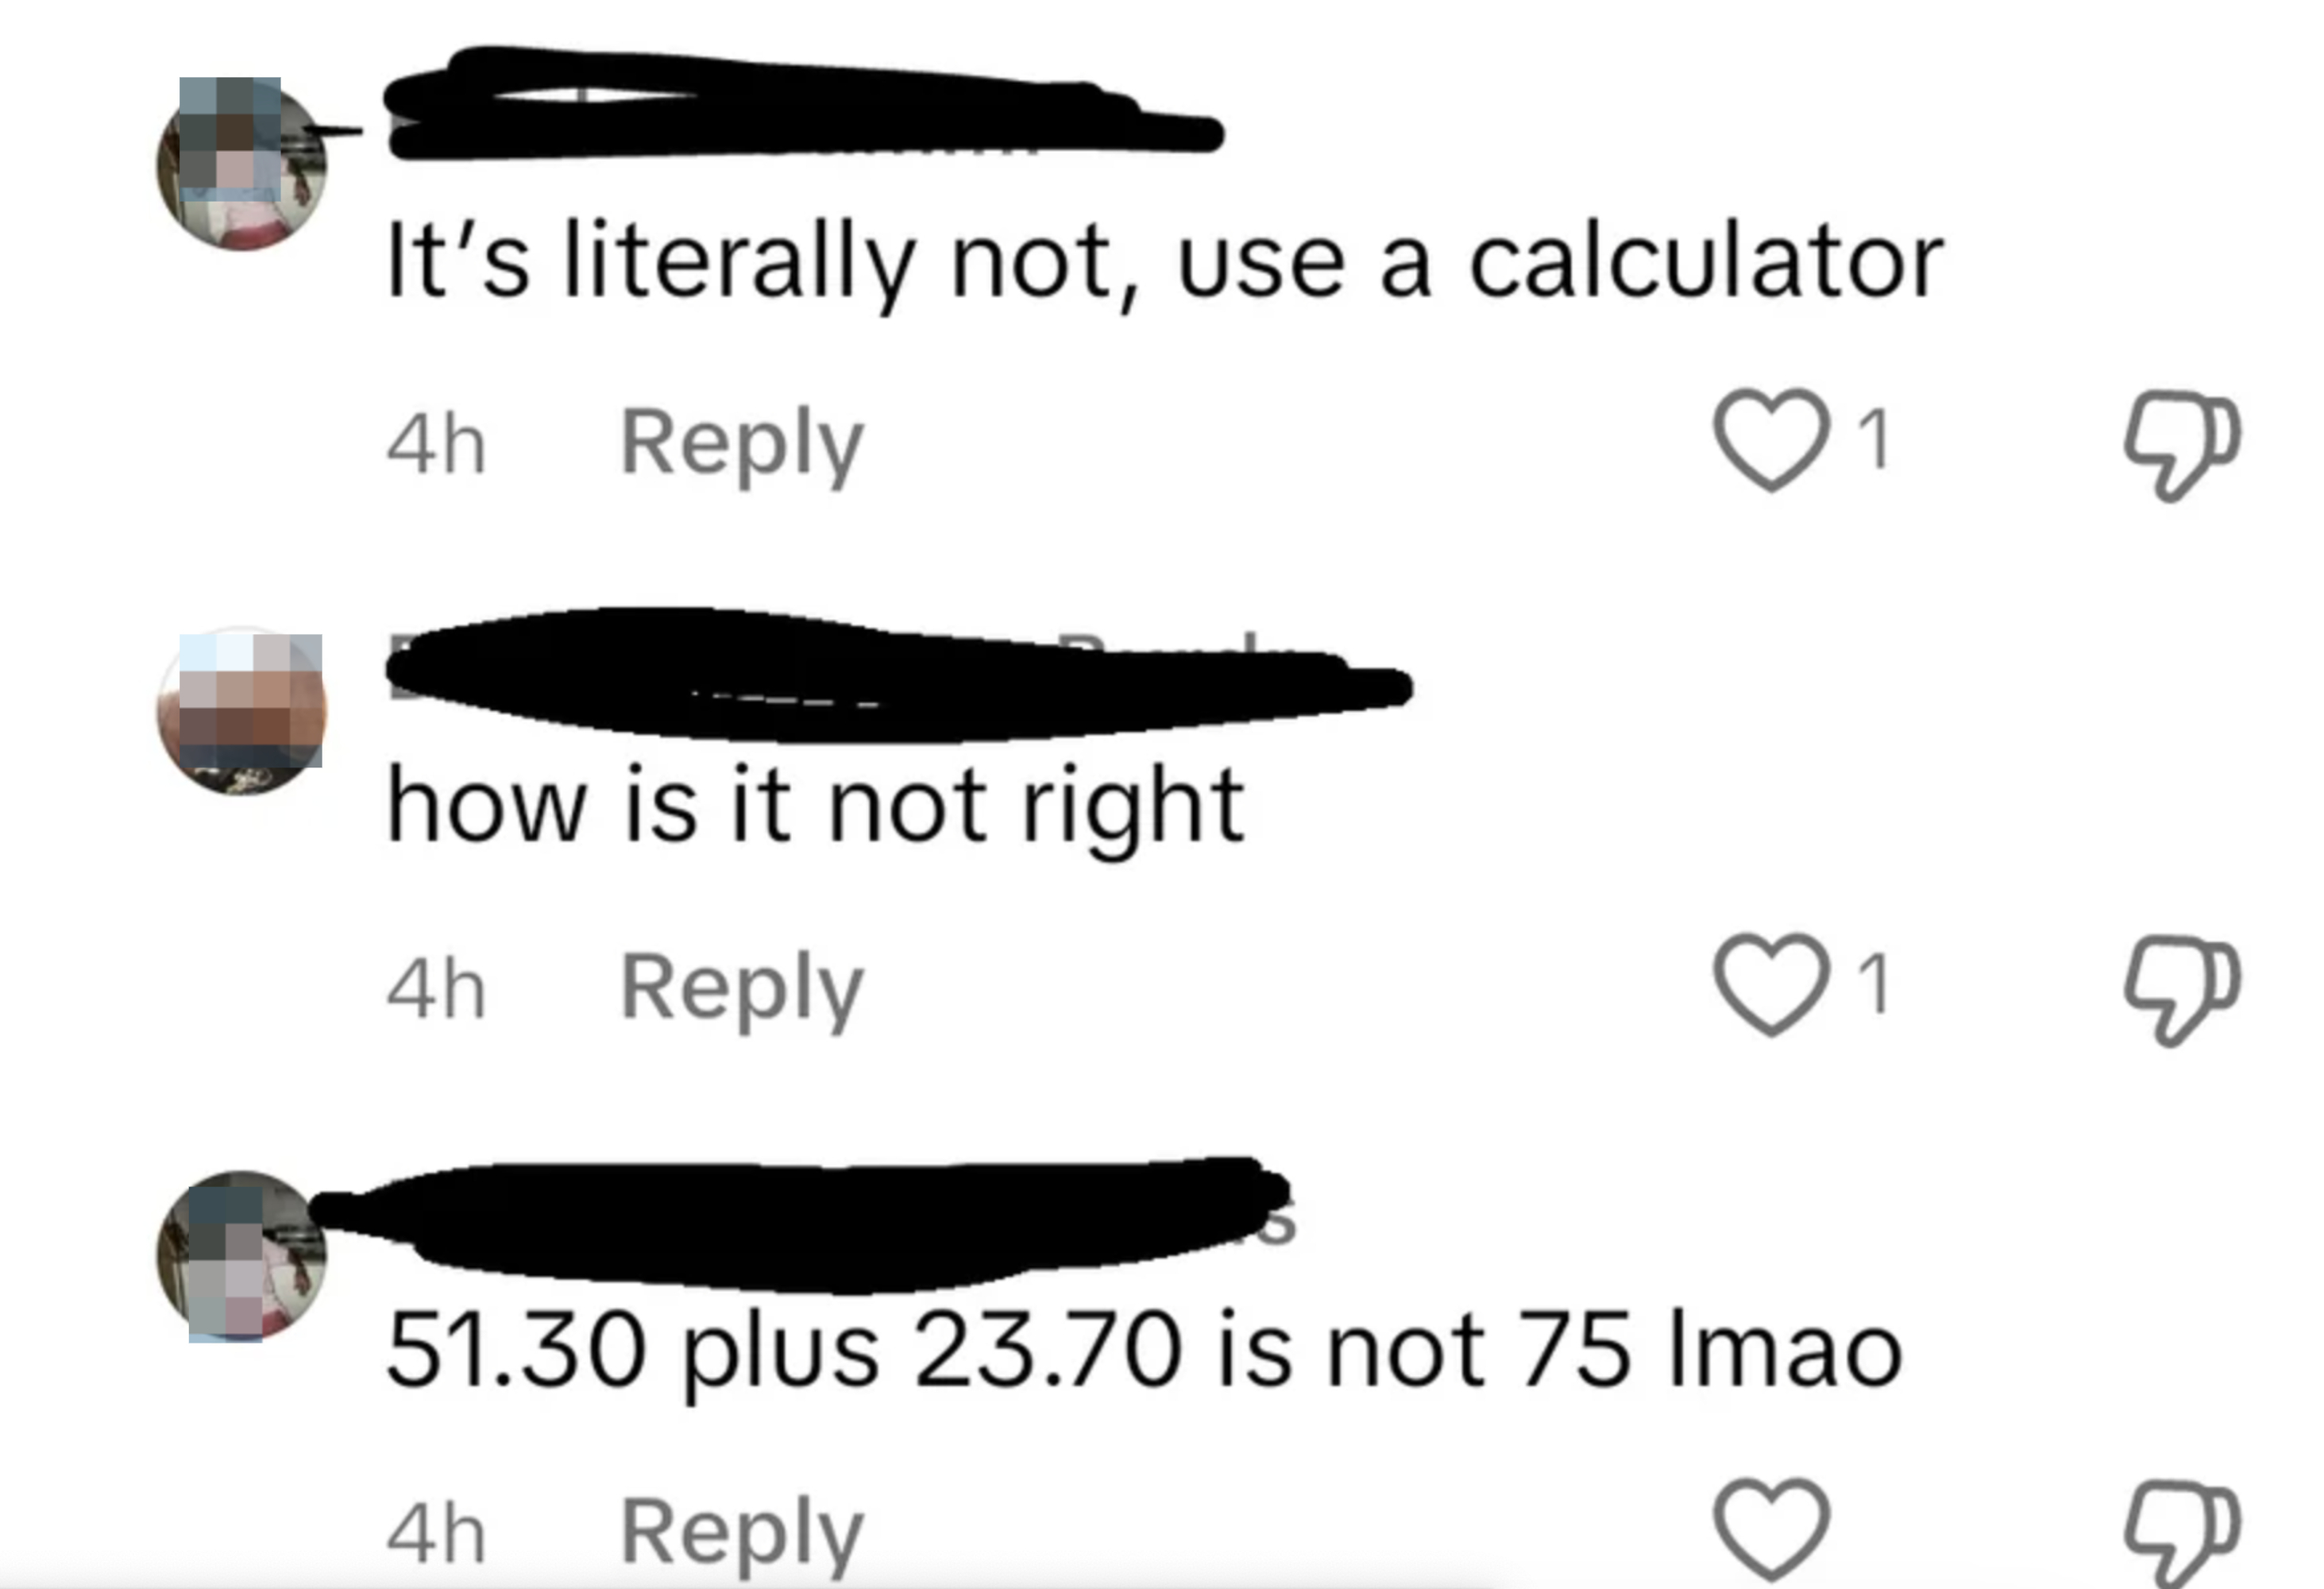 Screenshot of a social media thread where users debate a math error, including statements about using a calculator and incorrect addition